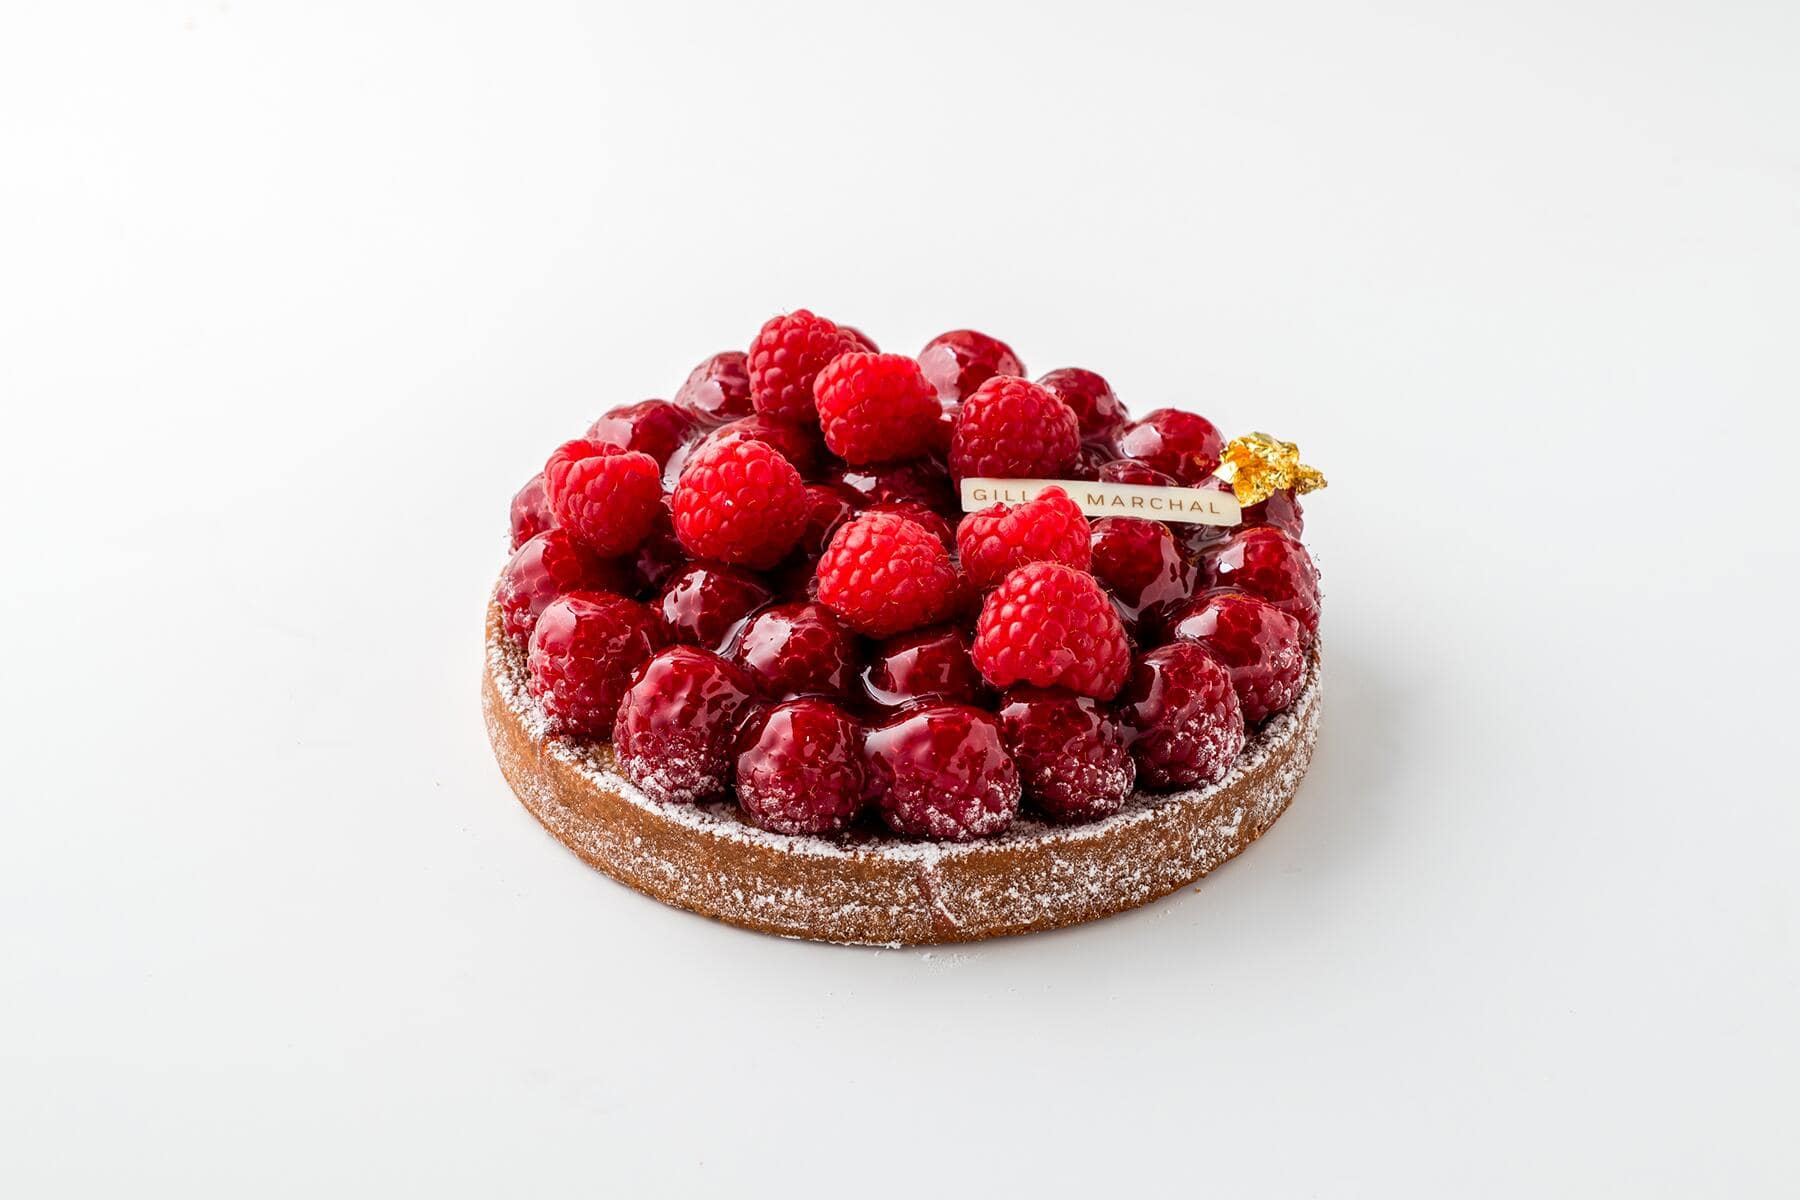 <a href='https://www.fodors.com/world/europe/france/paris/experiences/news/photos/the-best-patisseries-in-paris#'>From &quot;The 16 Best Patisseries in Paris: Gilles Marchal&quot;</a>